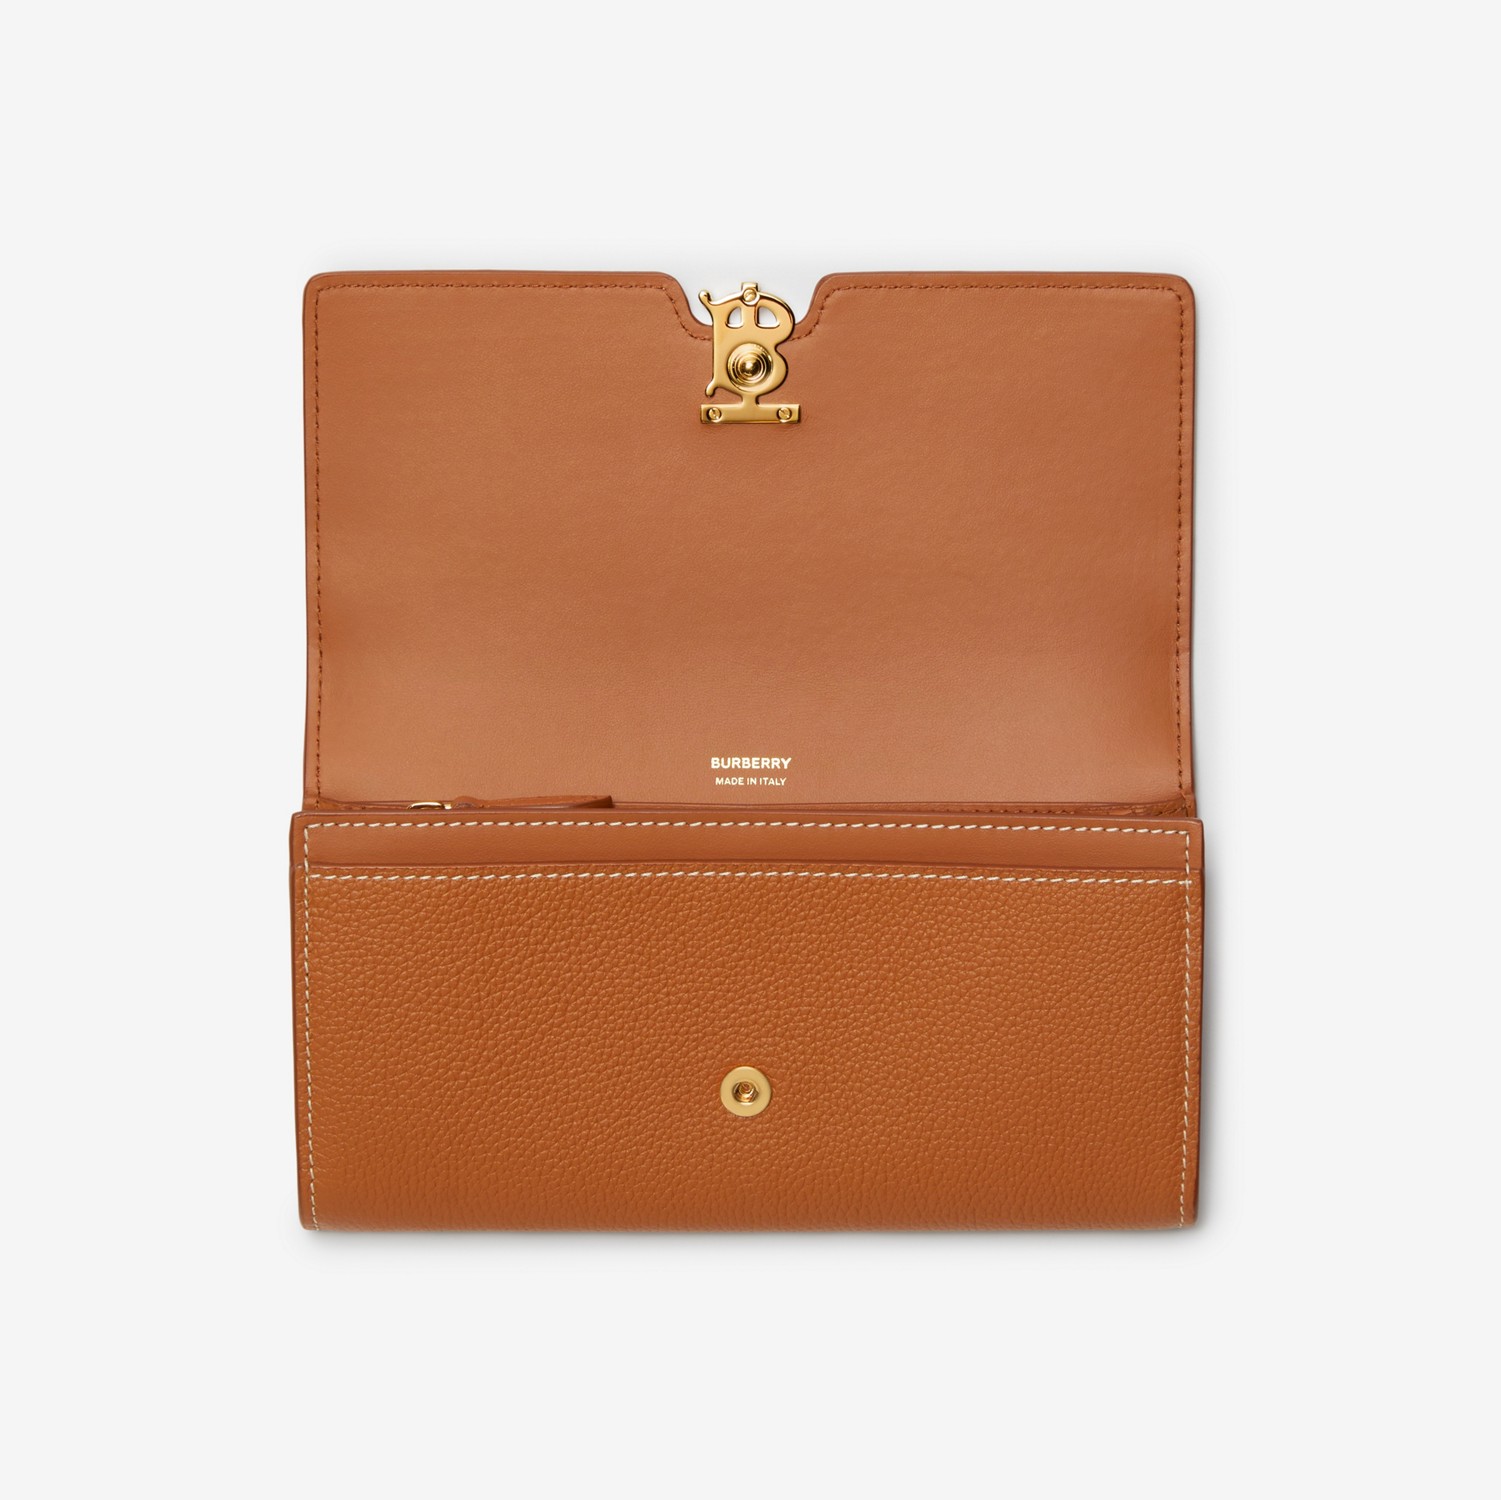 Grainy Leather TB Continental Wallet in Warm russet brown - Women | Burberry® Official